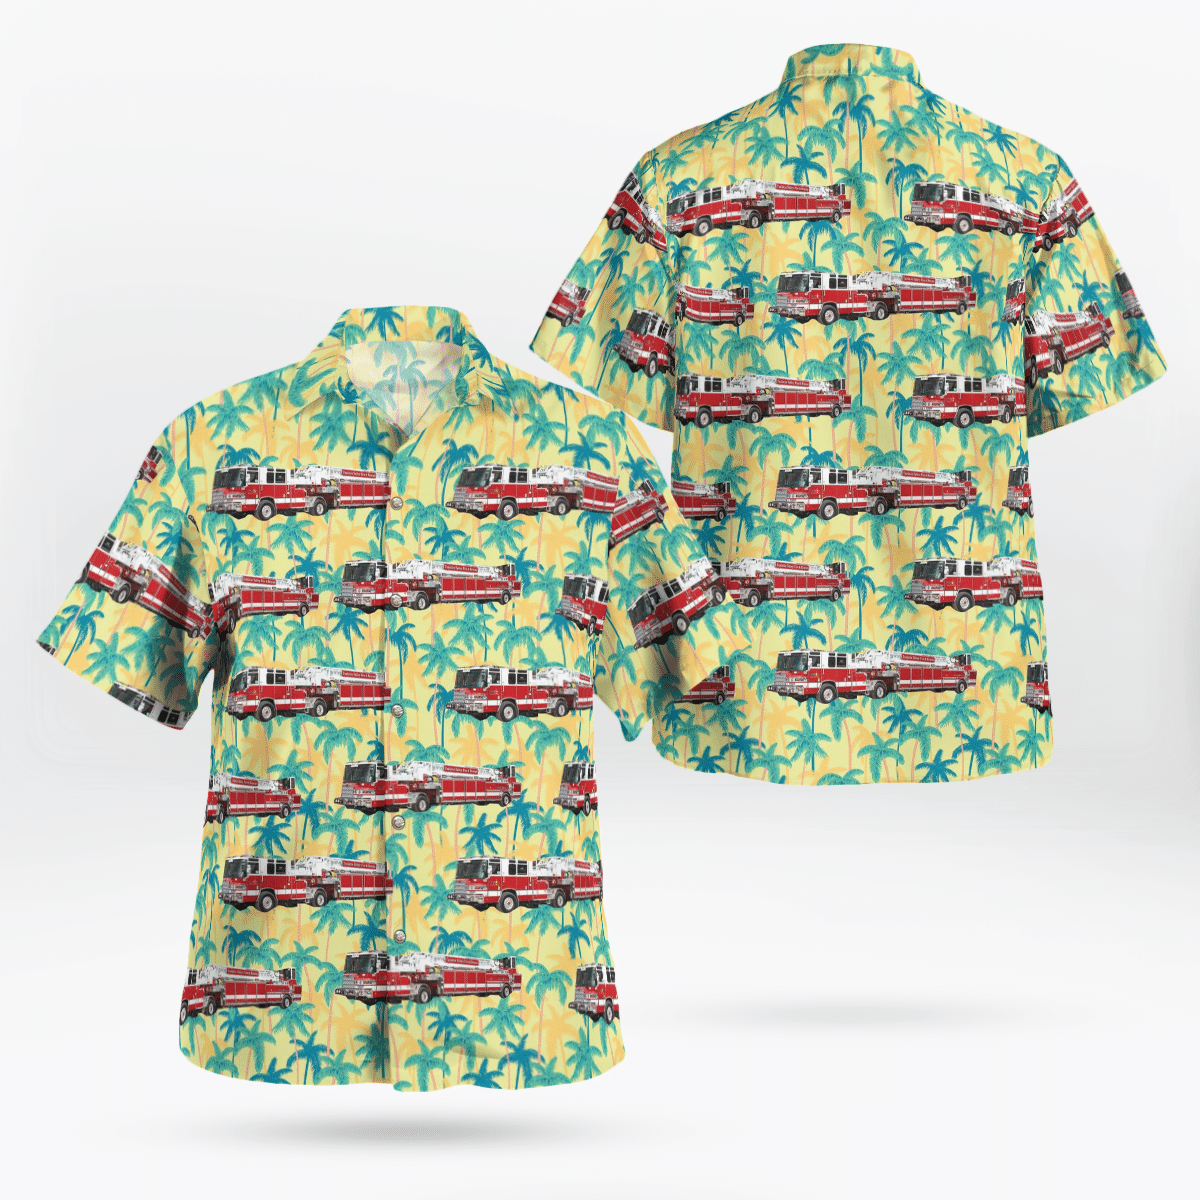 Consider getting these Hawaiian Shirt for your friends 75